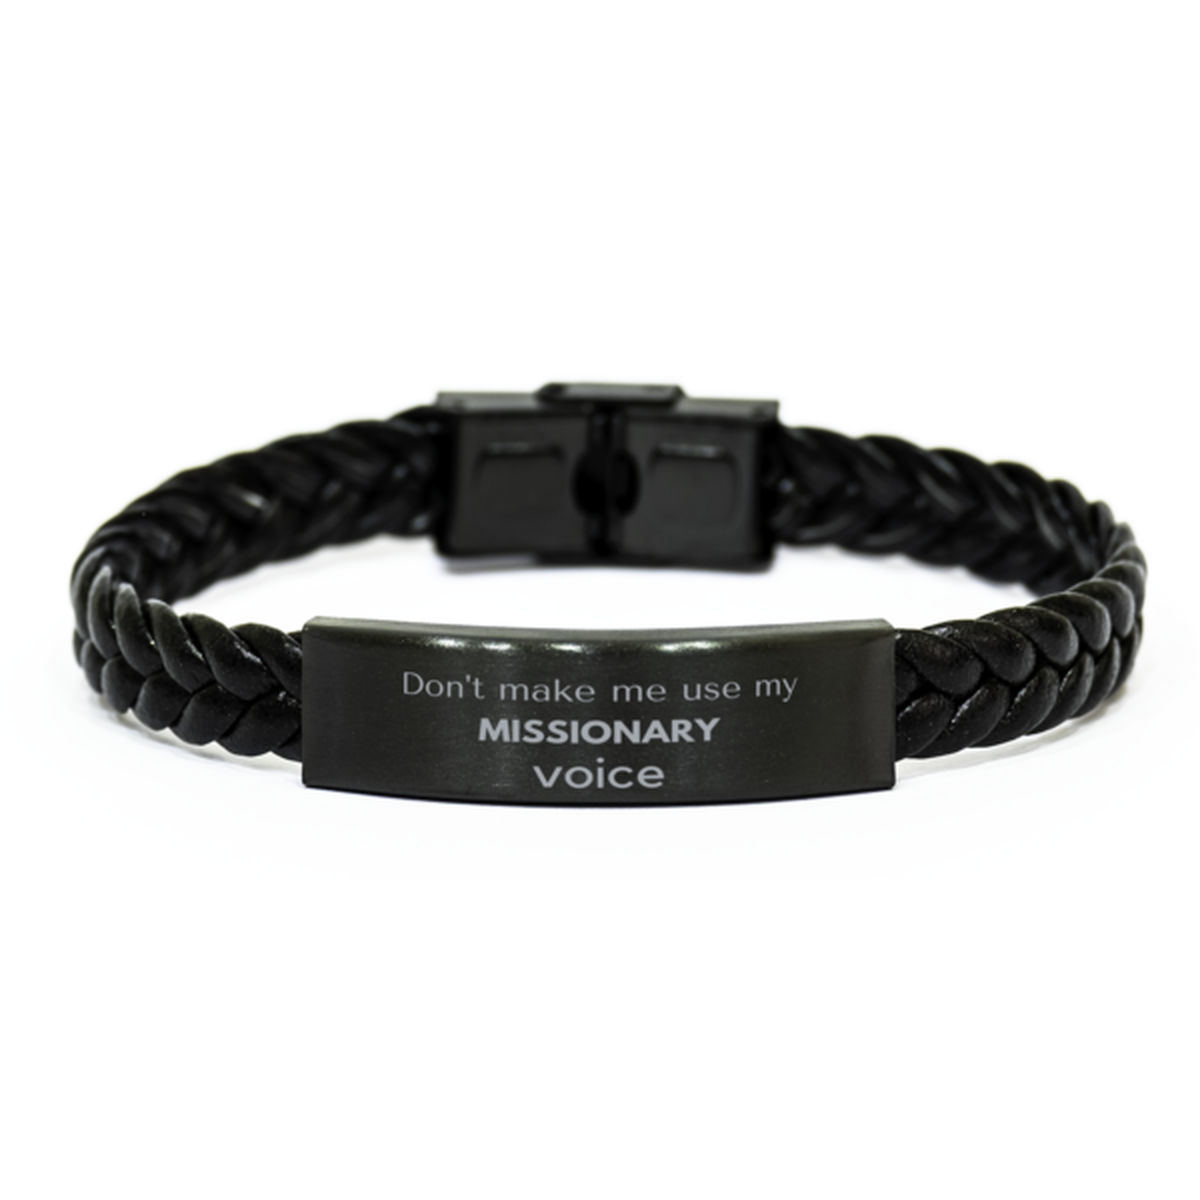 Don't make me use my Missionary voice, Sarcasm Missionary Gifts, Christmas Missionary Braided Leather Bracelet Birthday Unique Gifts For Missionary Coworkers, Men, Women, Colleague, Friends